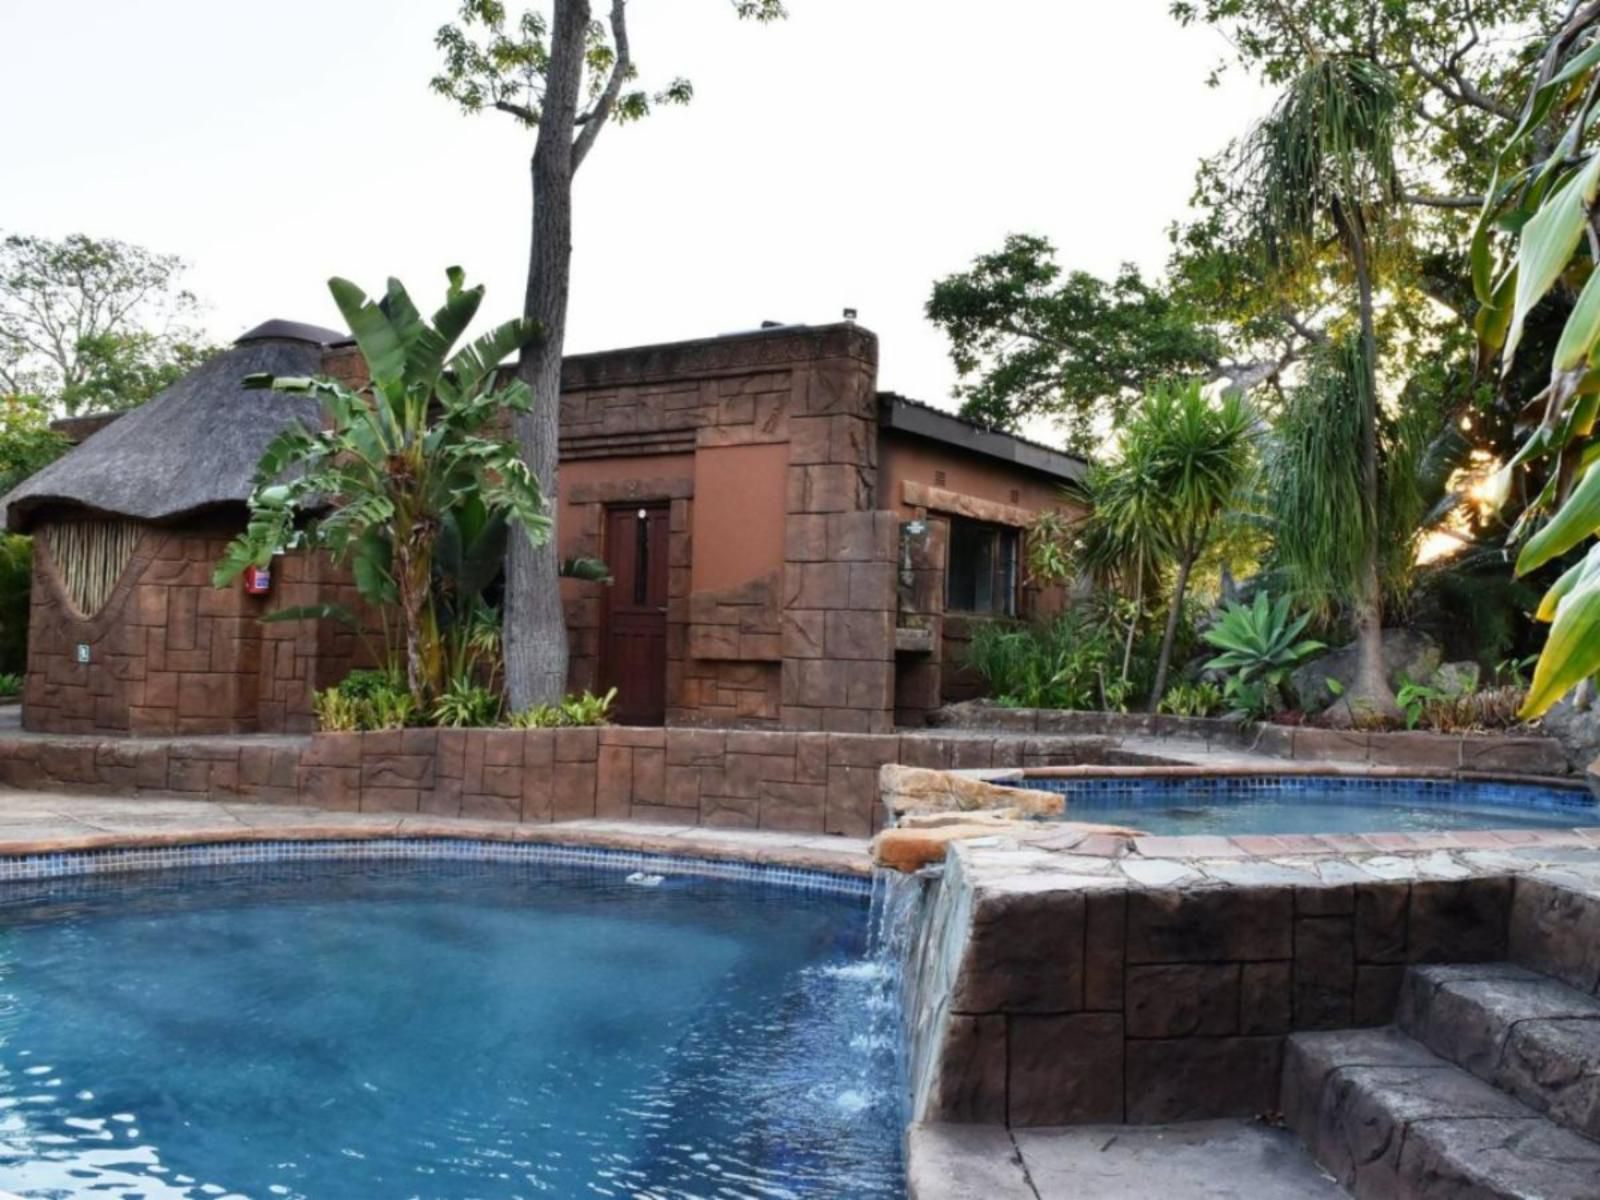 Tipperary Game Lodge Nelspruit Mpumalanga South Africa House, Building, Architecture, Palm Tree, Plant, Nature, Wood, Garden, Swimming Pool